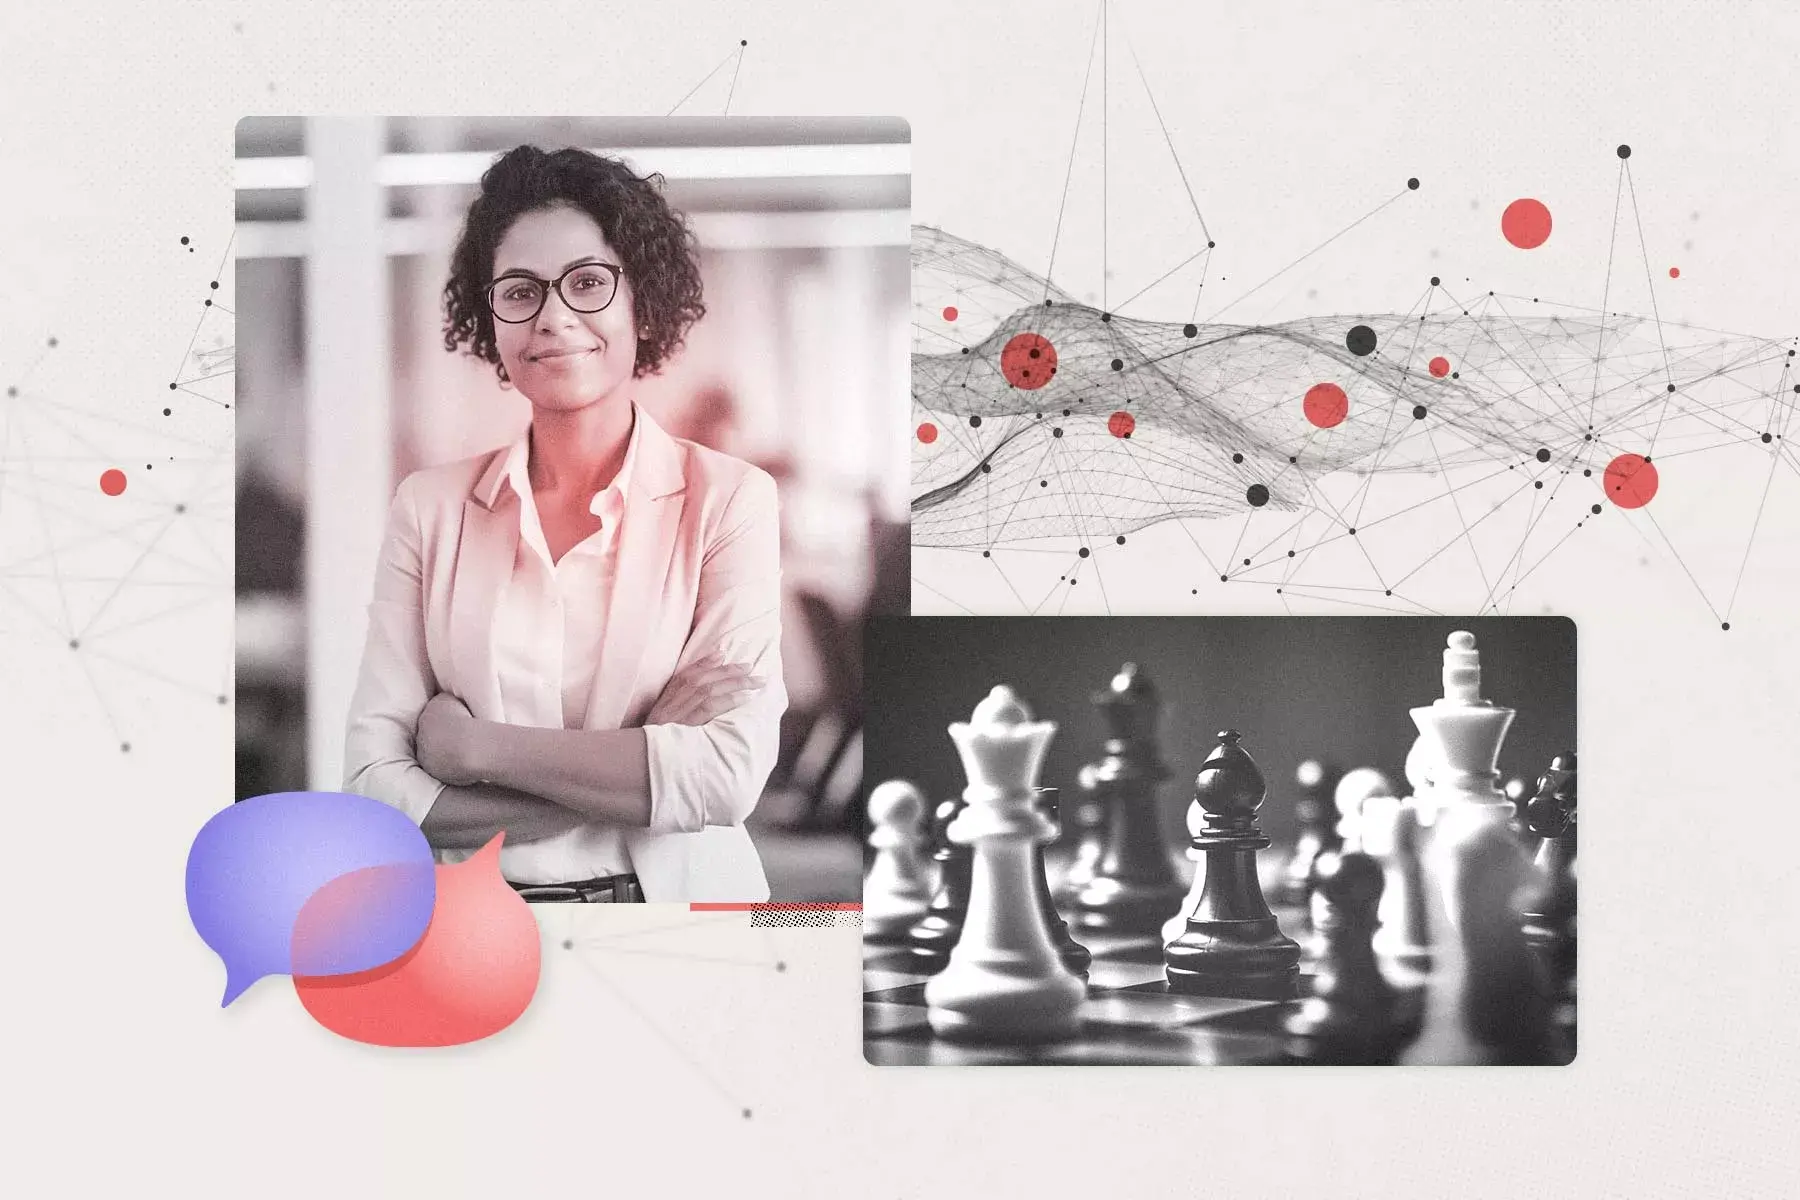 Banner image for an article on resource management for enterprise organizations. Shows a photograph of a woman in an office environment and illustrations representing data and communications.